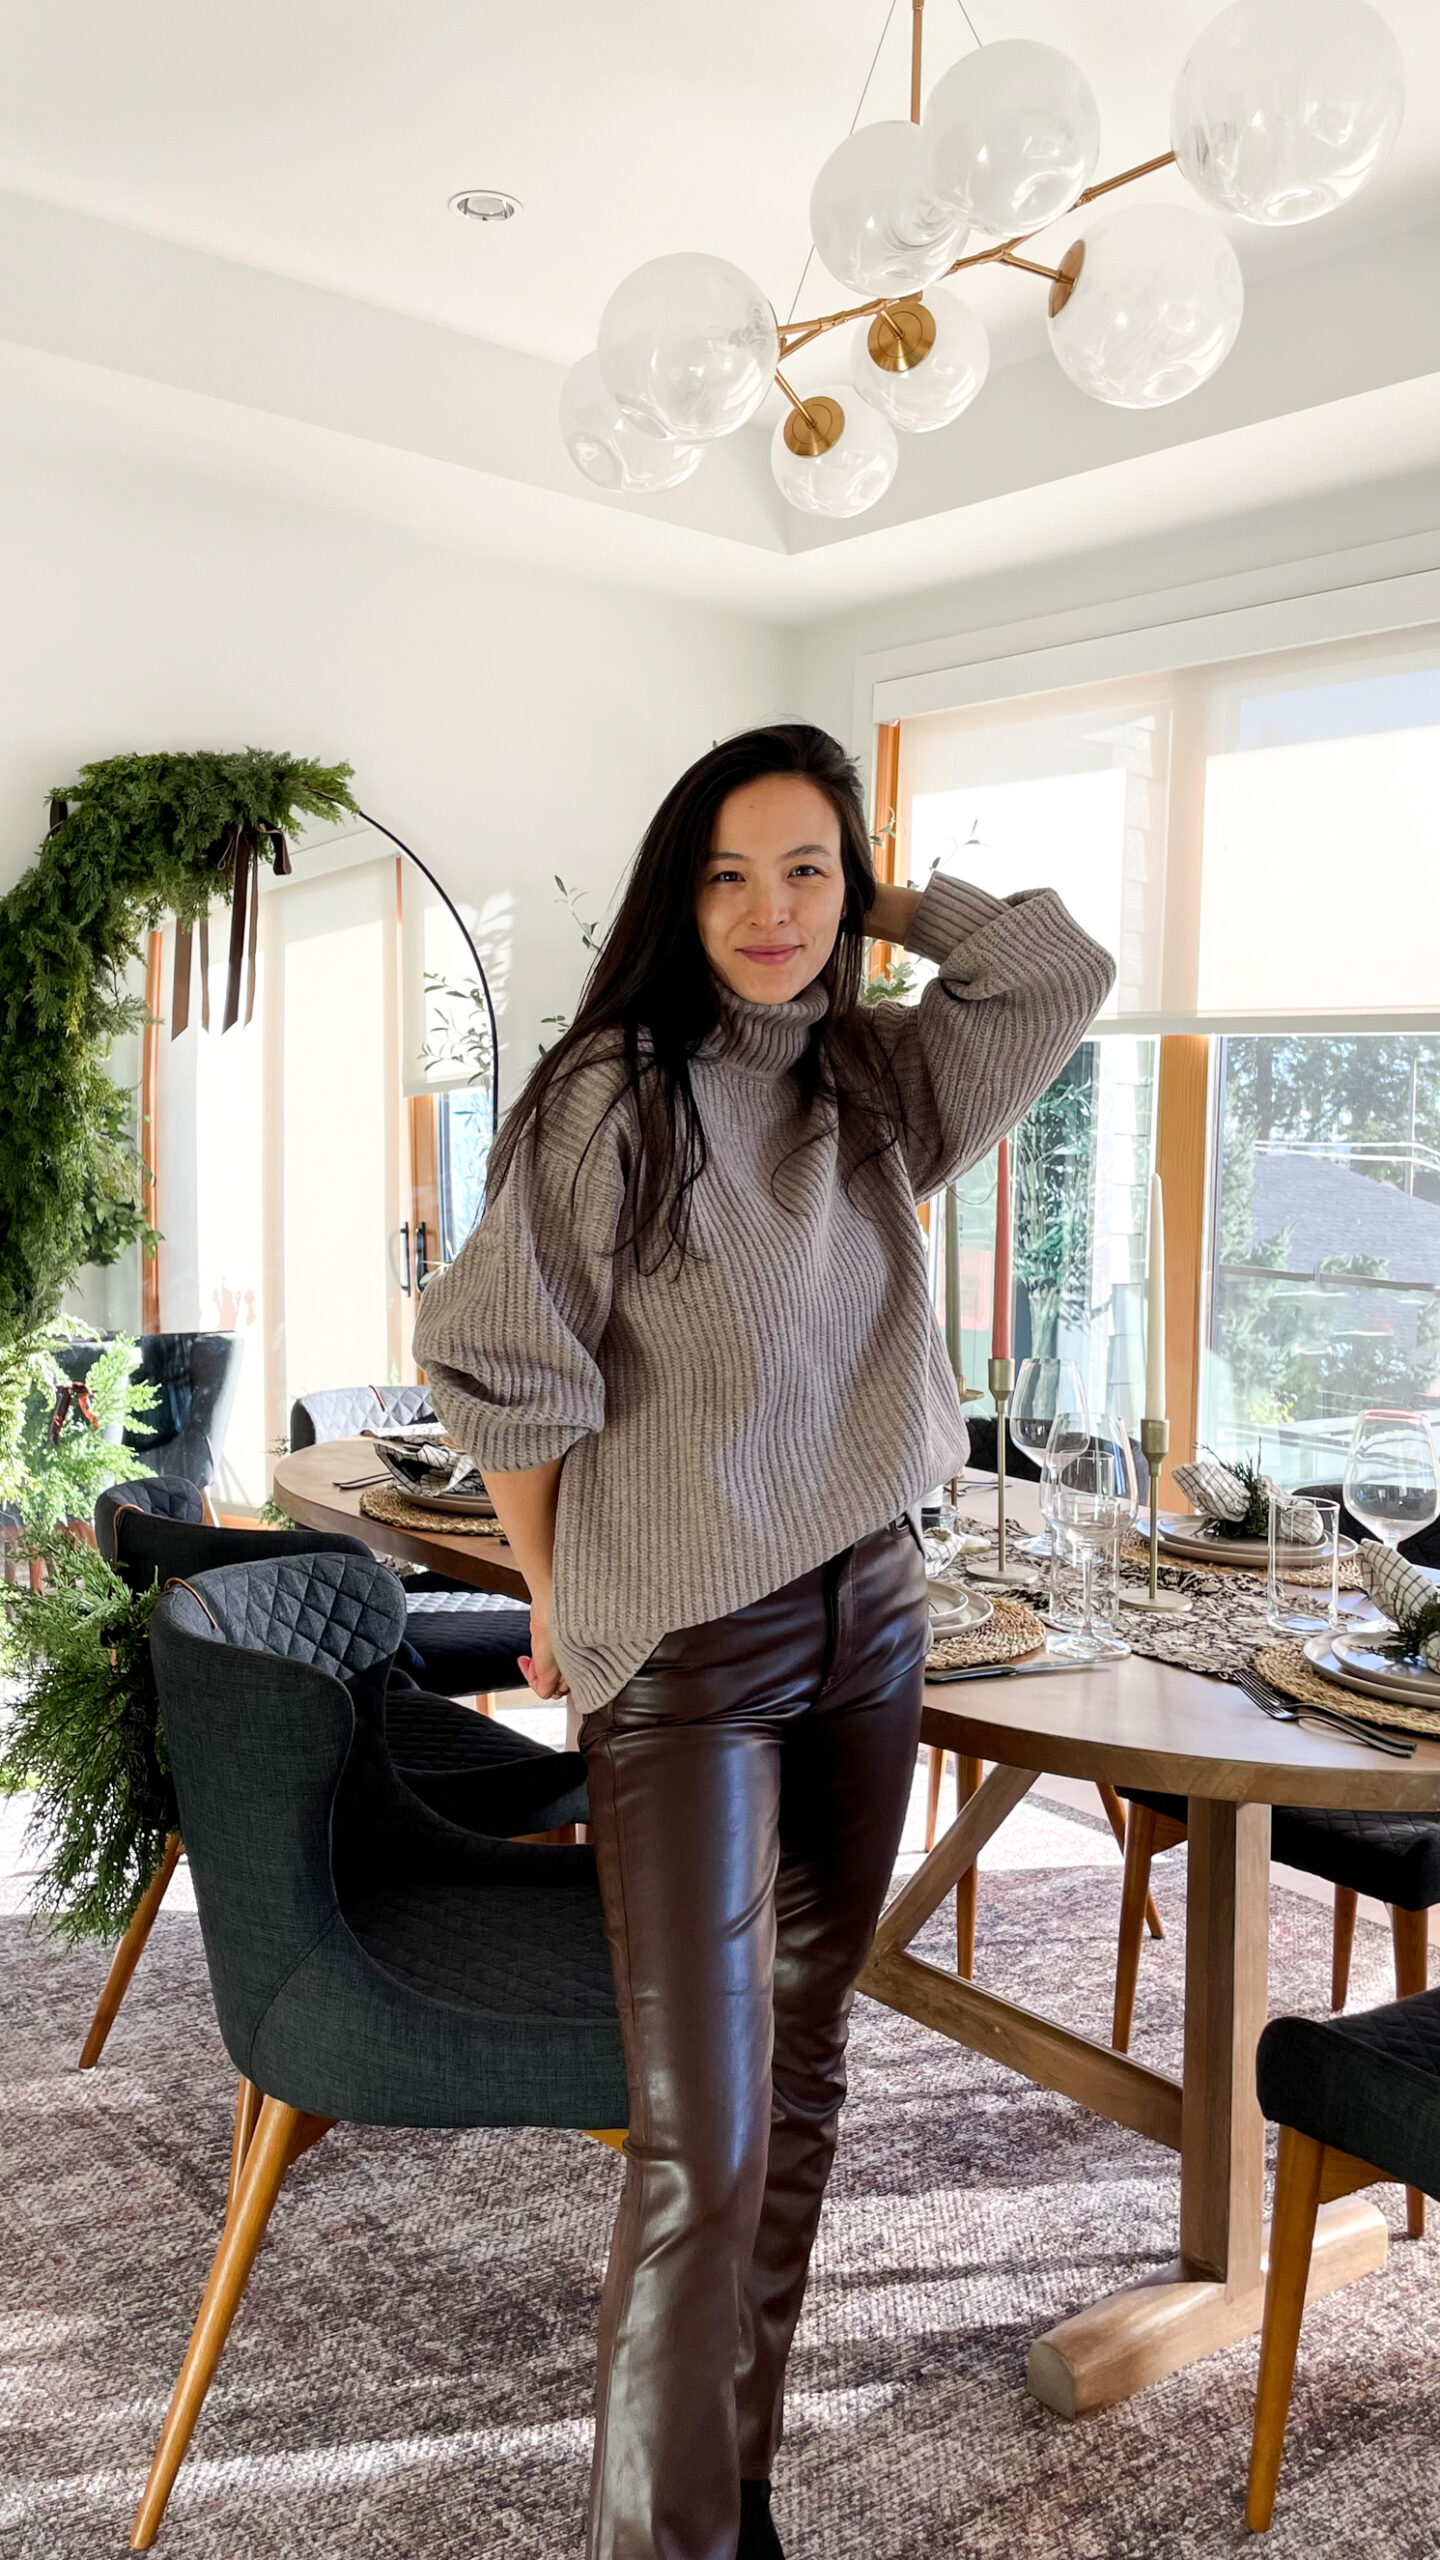 women dressed in holiday outfit setting the table. brown sweater and brown leather pants